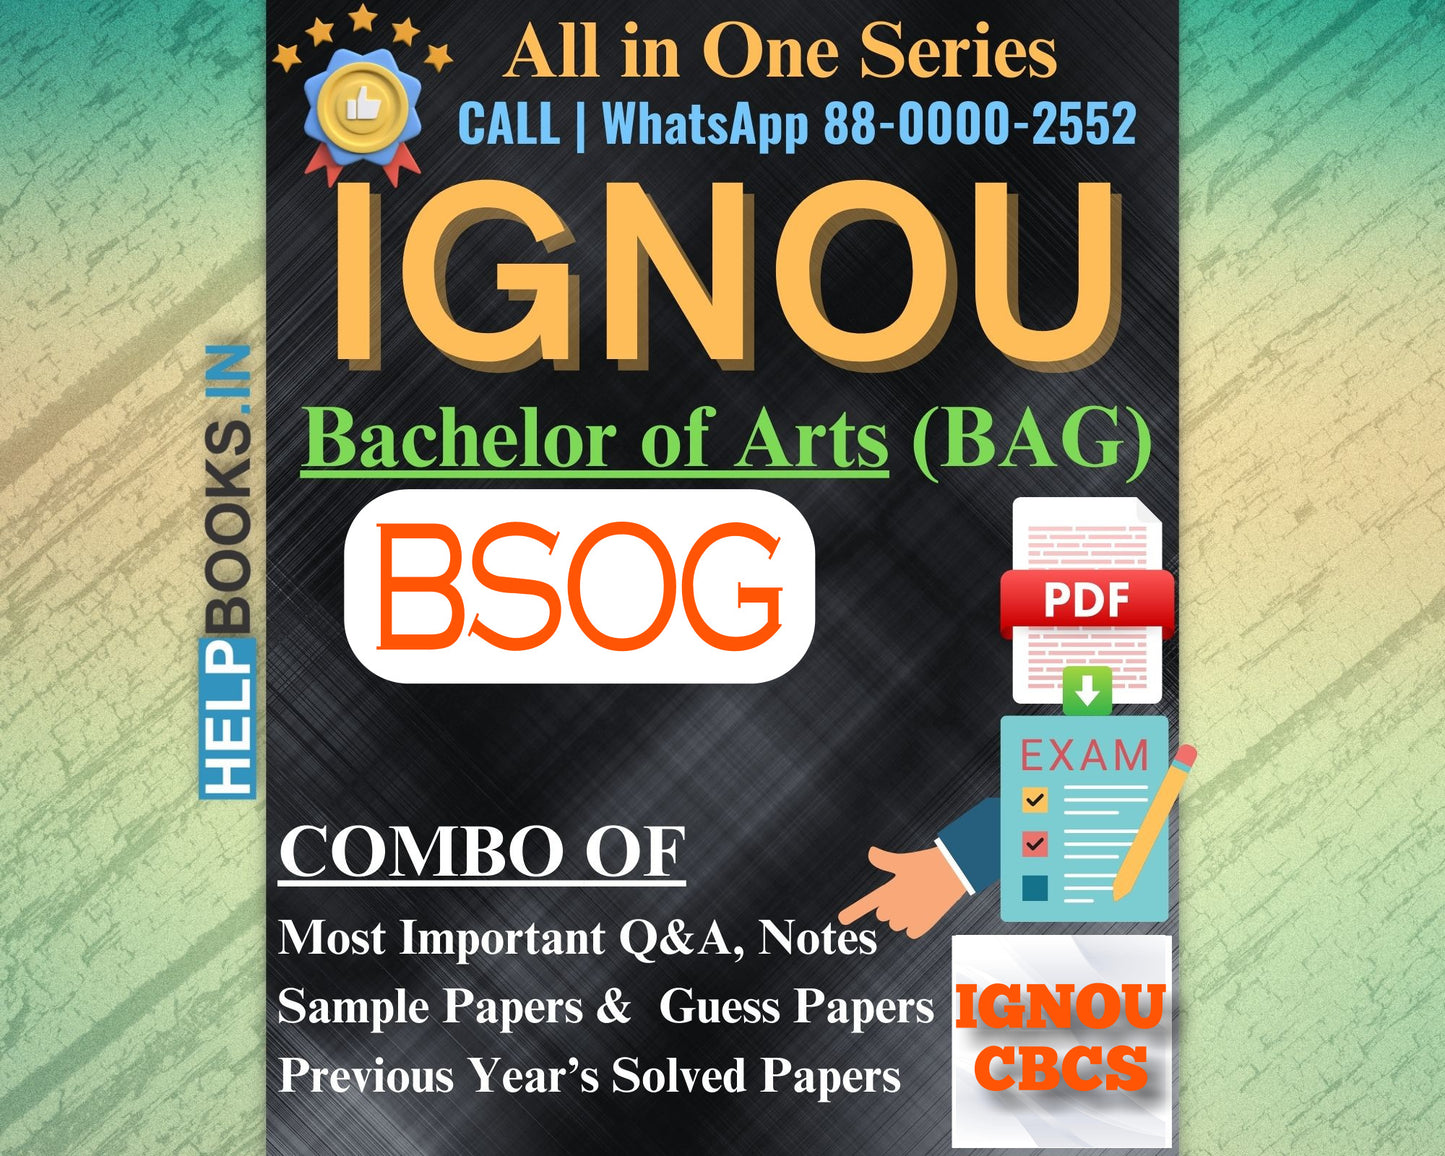 IGNOU BAG Online Study Package: Bachelor of Arts (BA) - Previous Year’s Solved Papers, Q&A, Exam Notes, Sample Papers, Guess Papers-BSOG171, BSOG173, BSOG176